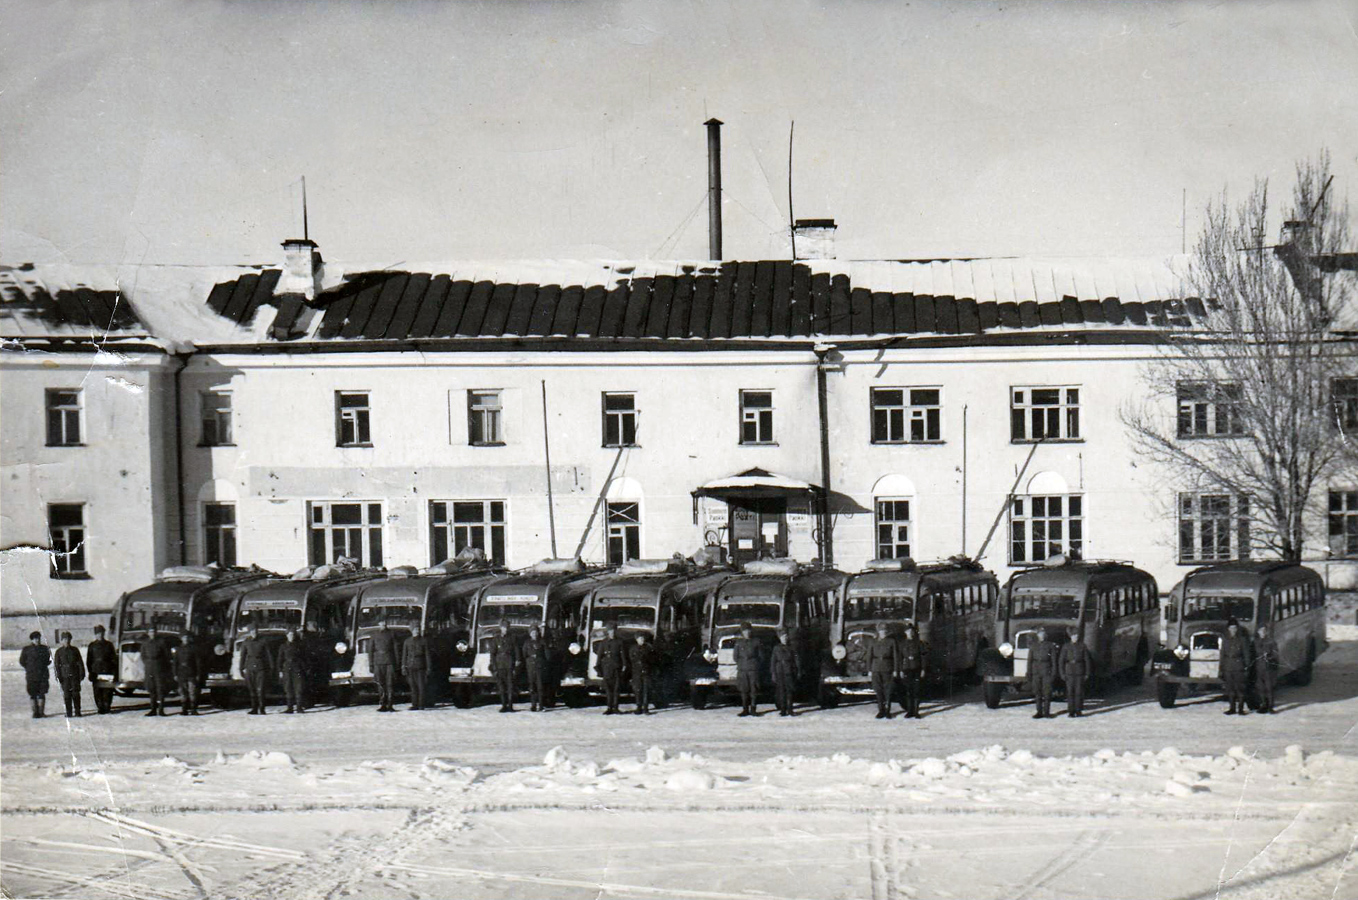 Early 1940's. The main square